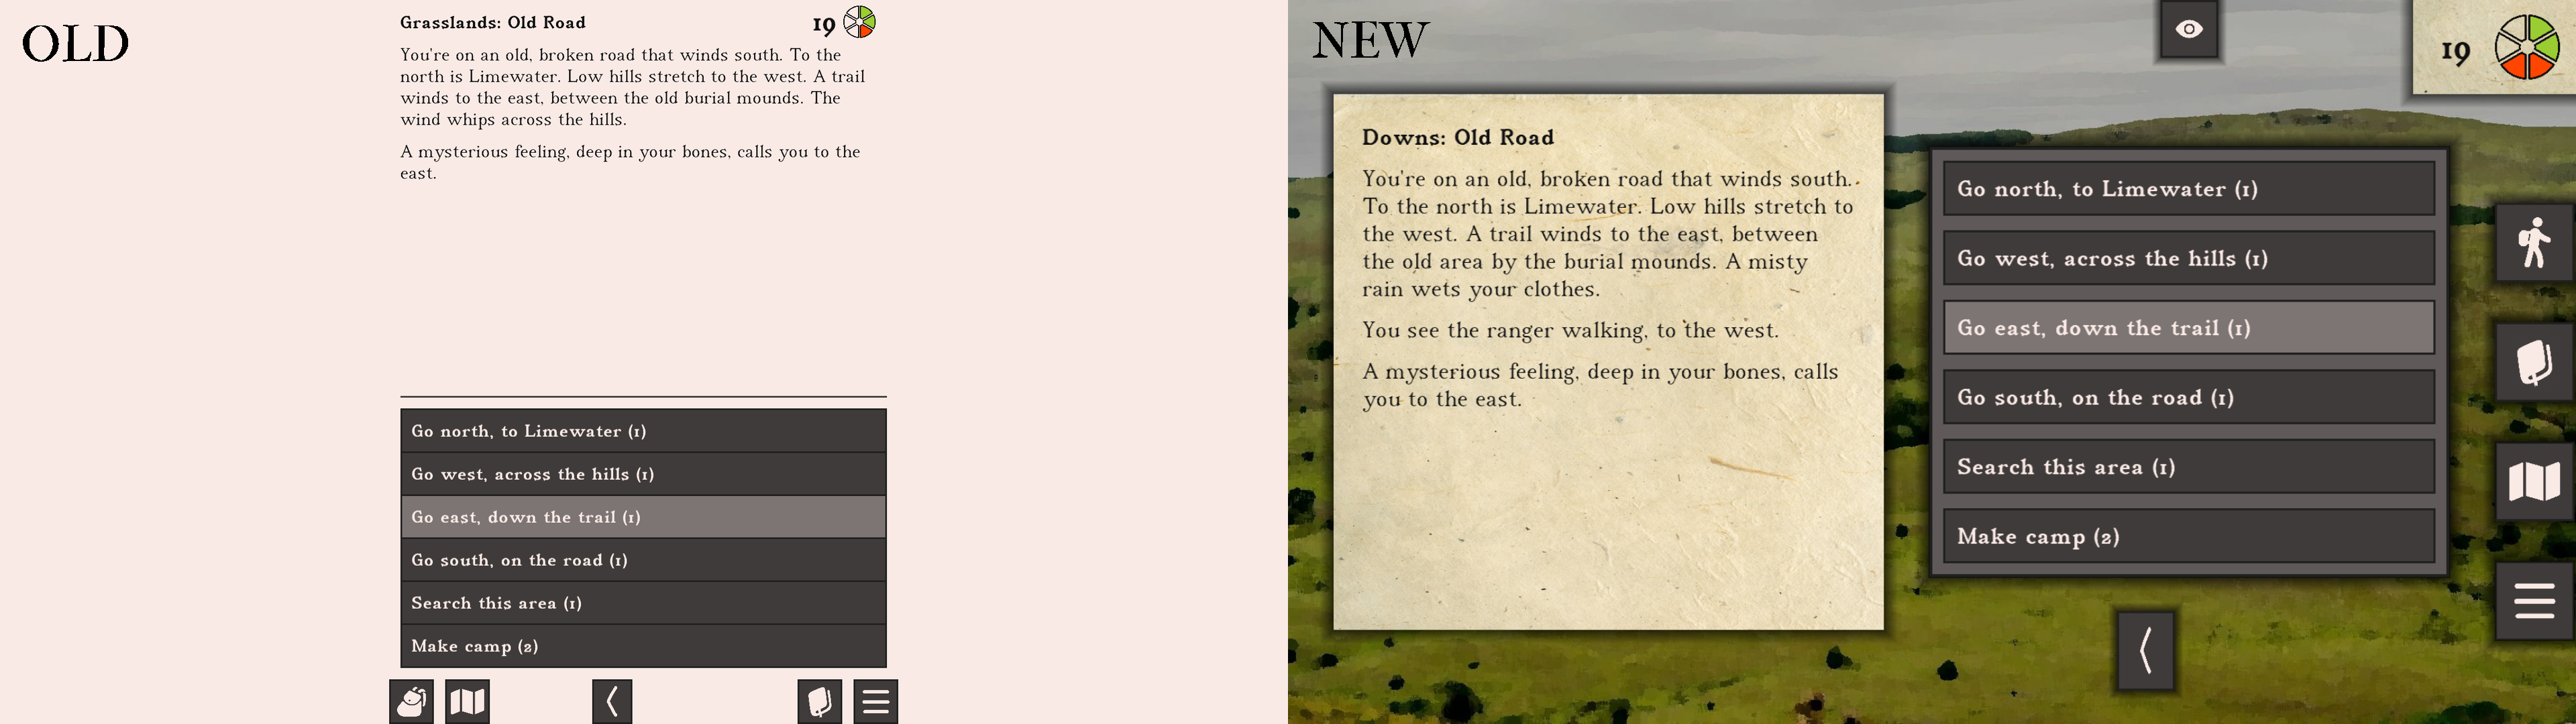 Side-by-side comparison of the old and new UI, both showing the player standing on the old south road where it passes the burial mounds. The new version has a background with green, rolling hills, and the text is written on parchment.